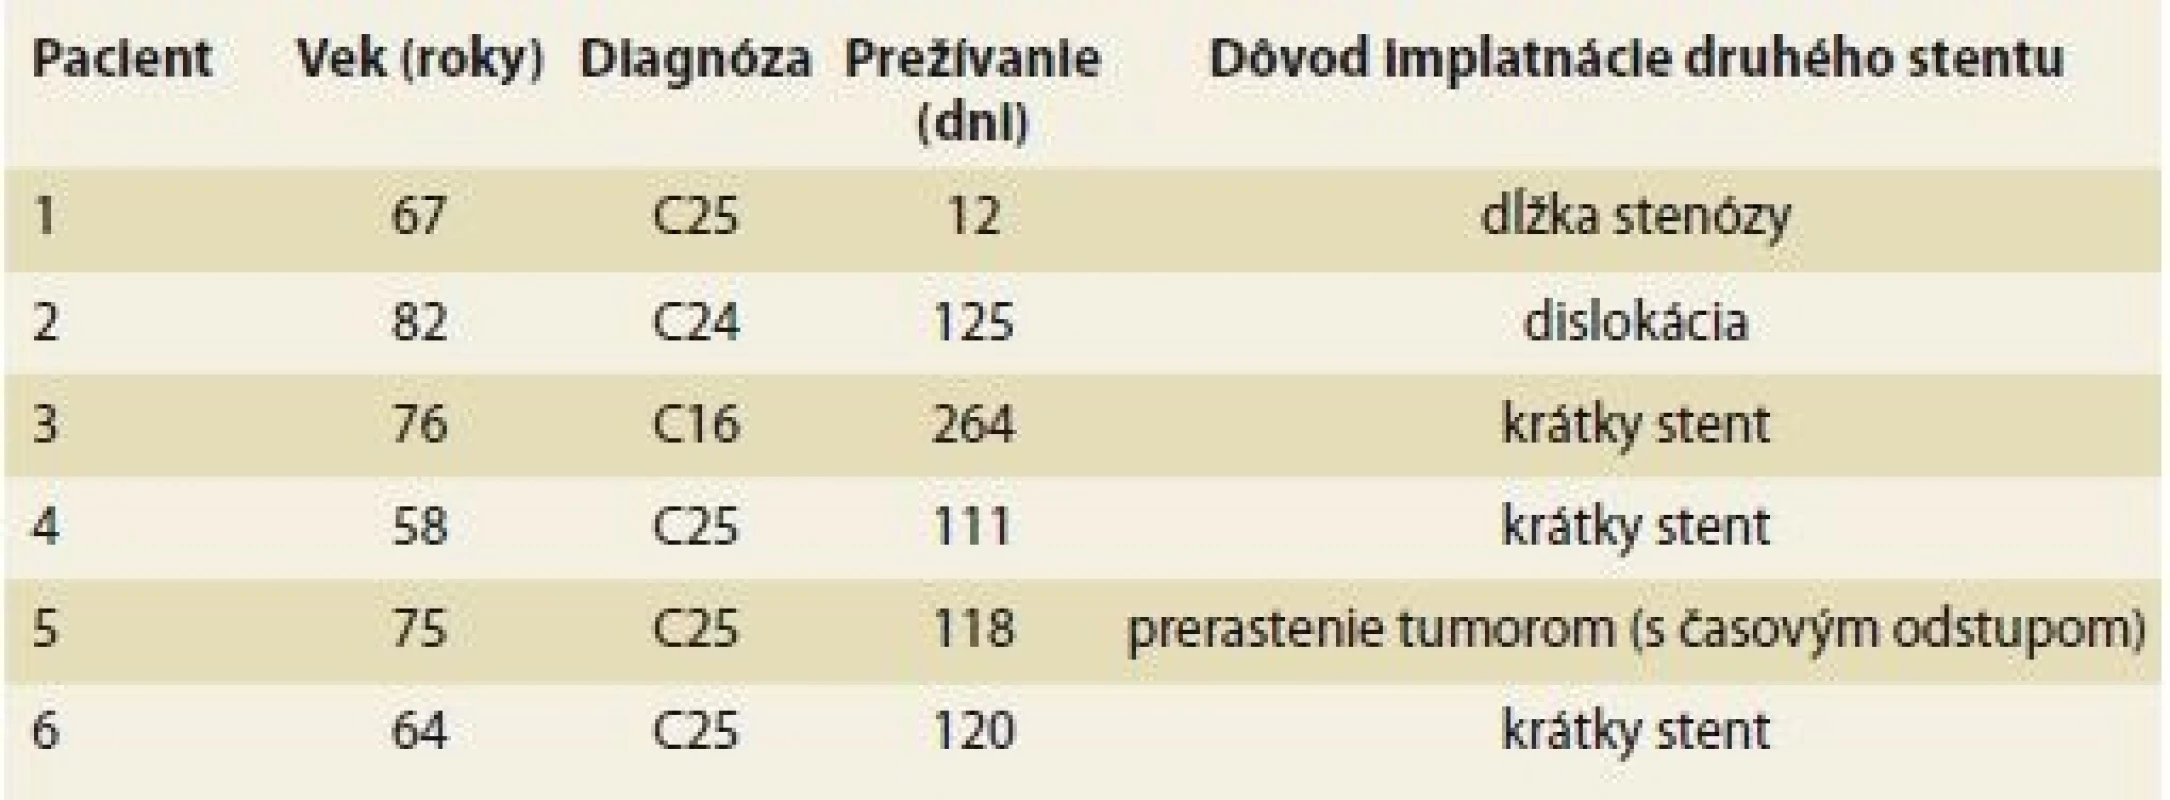 Dôvody implantácie dvoch metalických stentov do stenózy duodena.
Tab. 4. Reasons for duodenal placement of two metallic stents in a duodenal
stenosis.